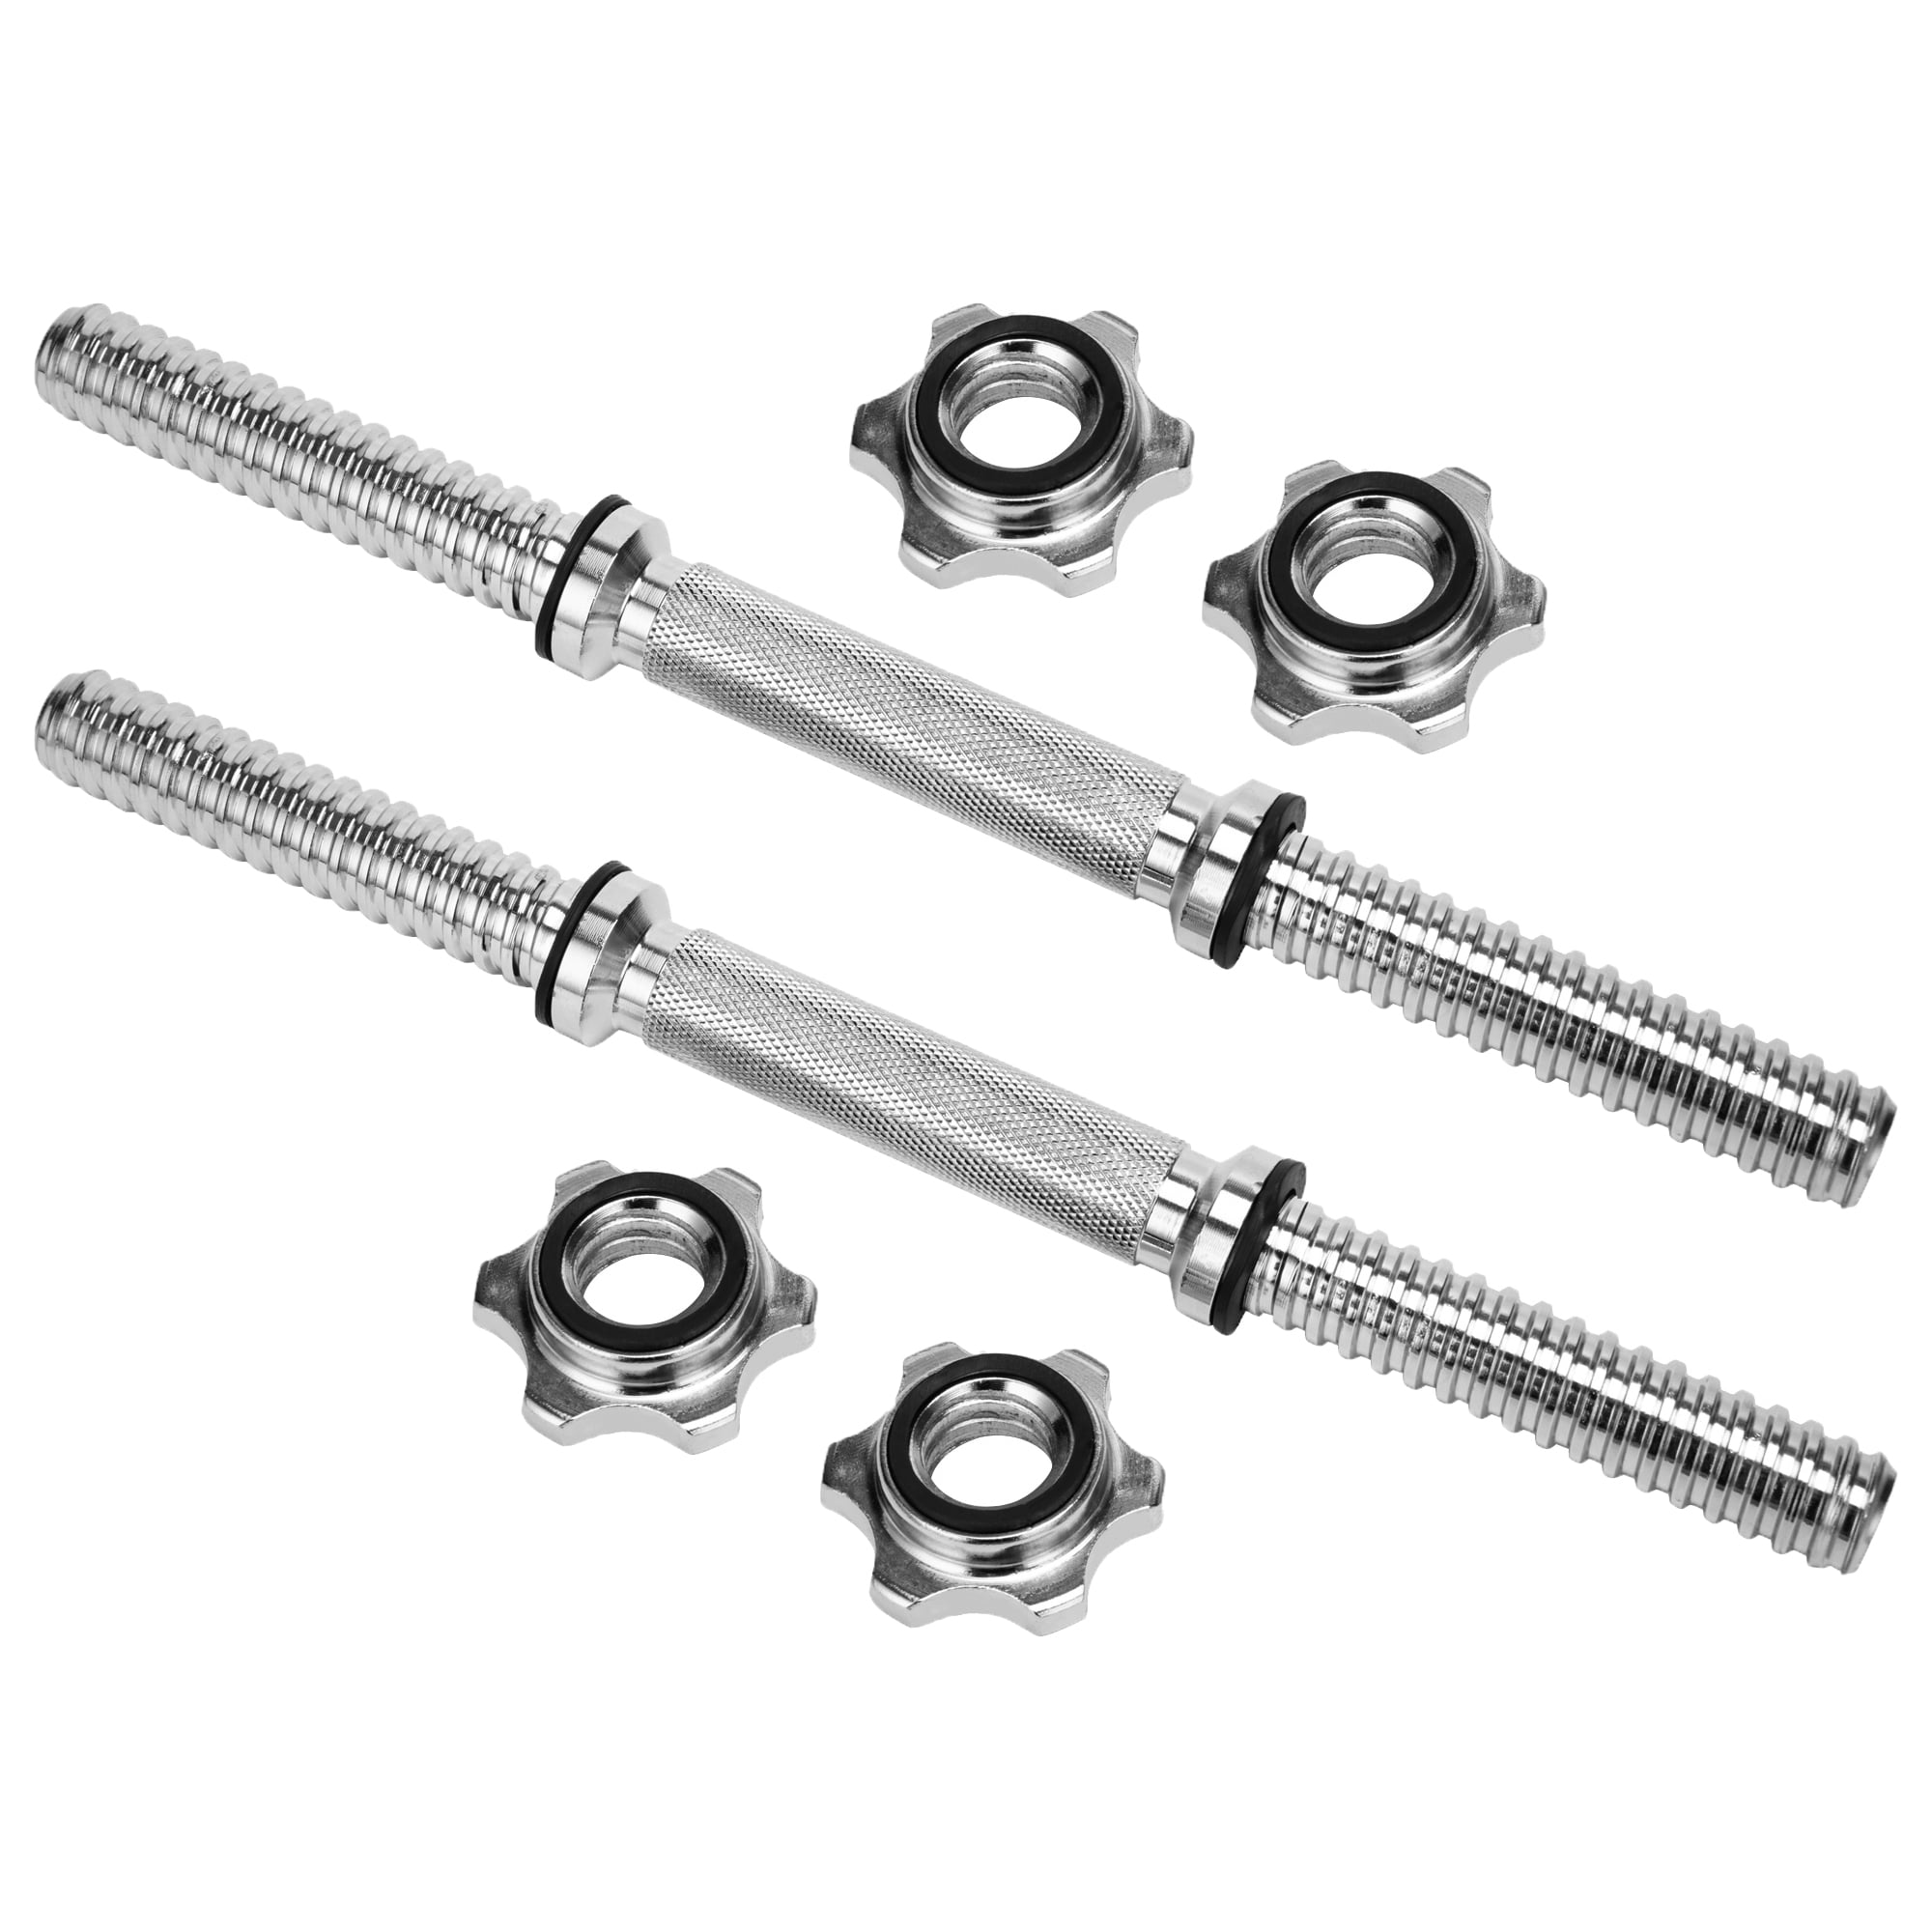 Dumbbell Bars Spinlock Collars Nuts Weight Lifting Gym Dumbell Handles Training